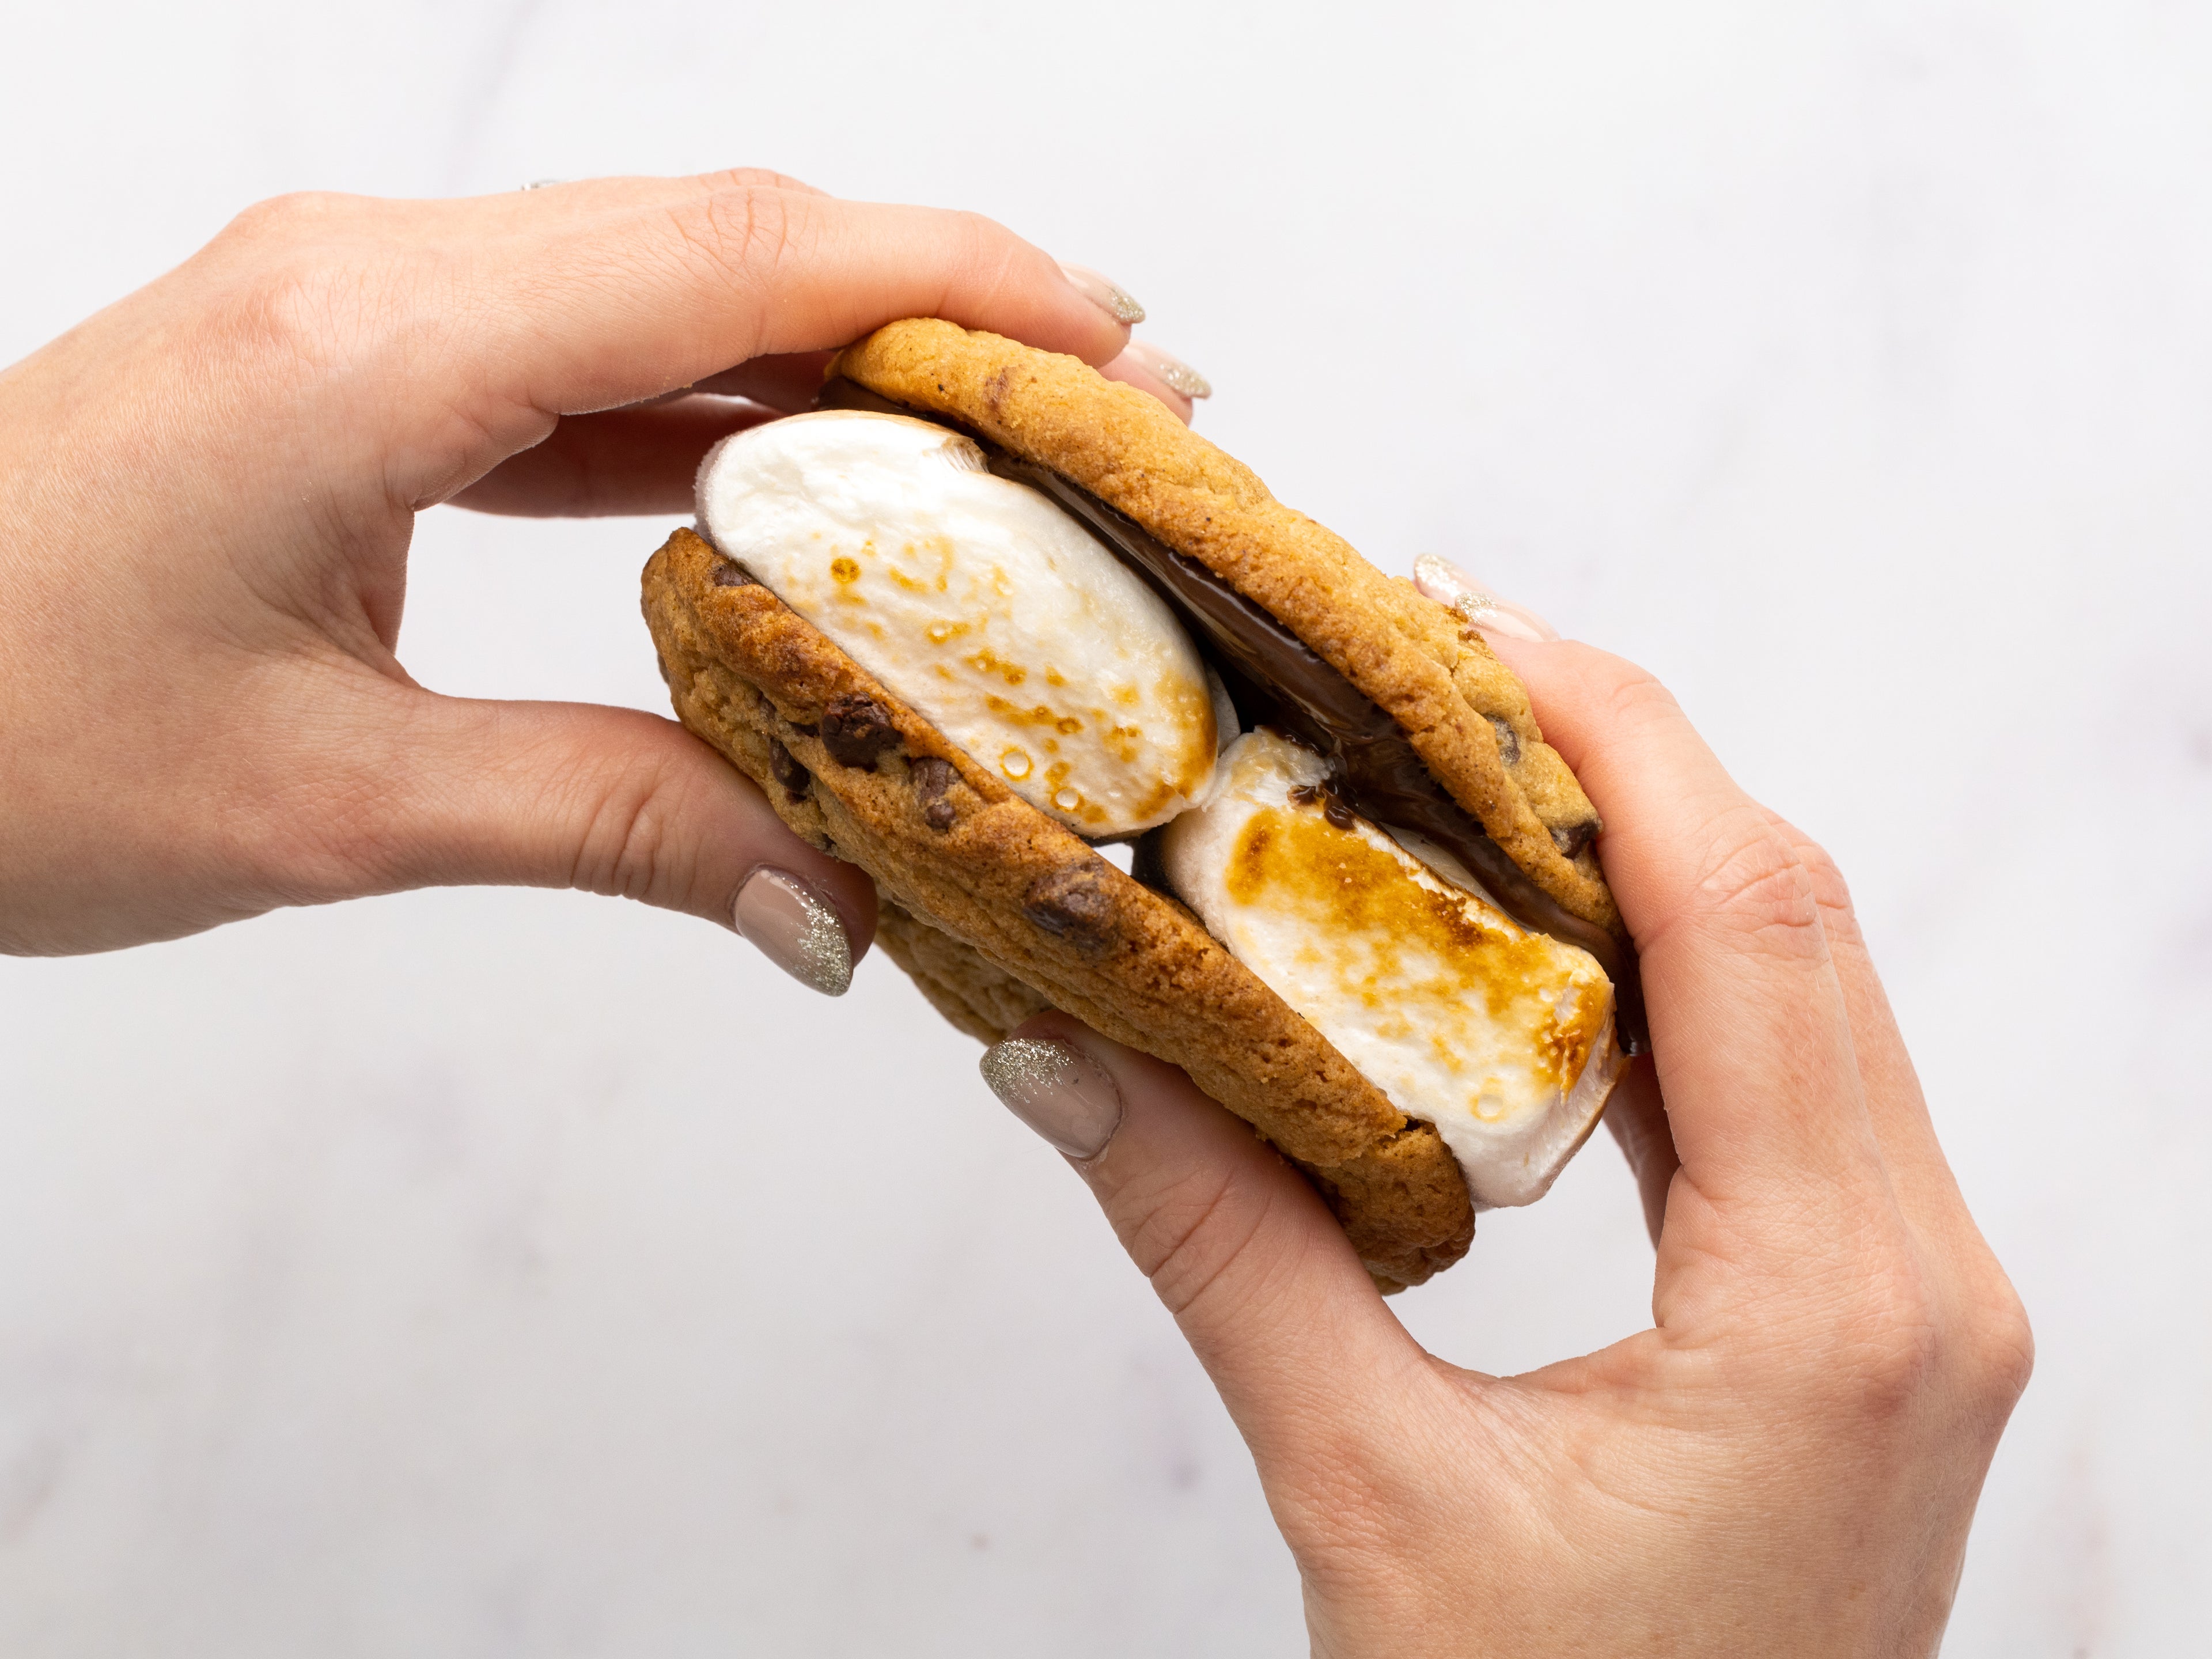 Hand holding a smores cookie sandwich